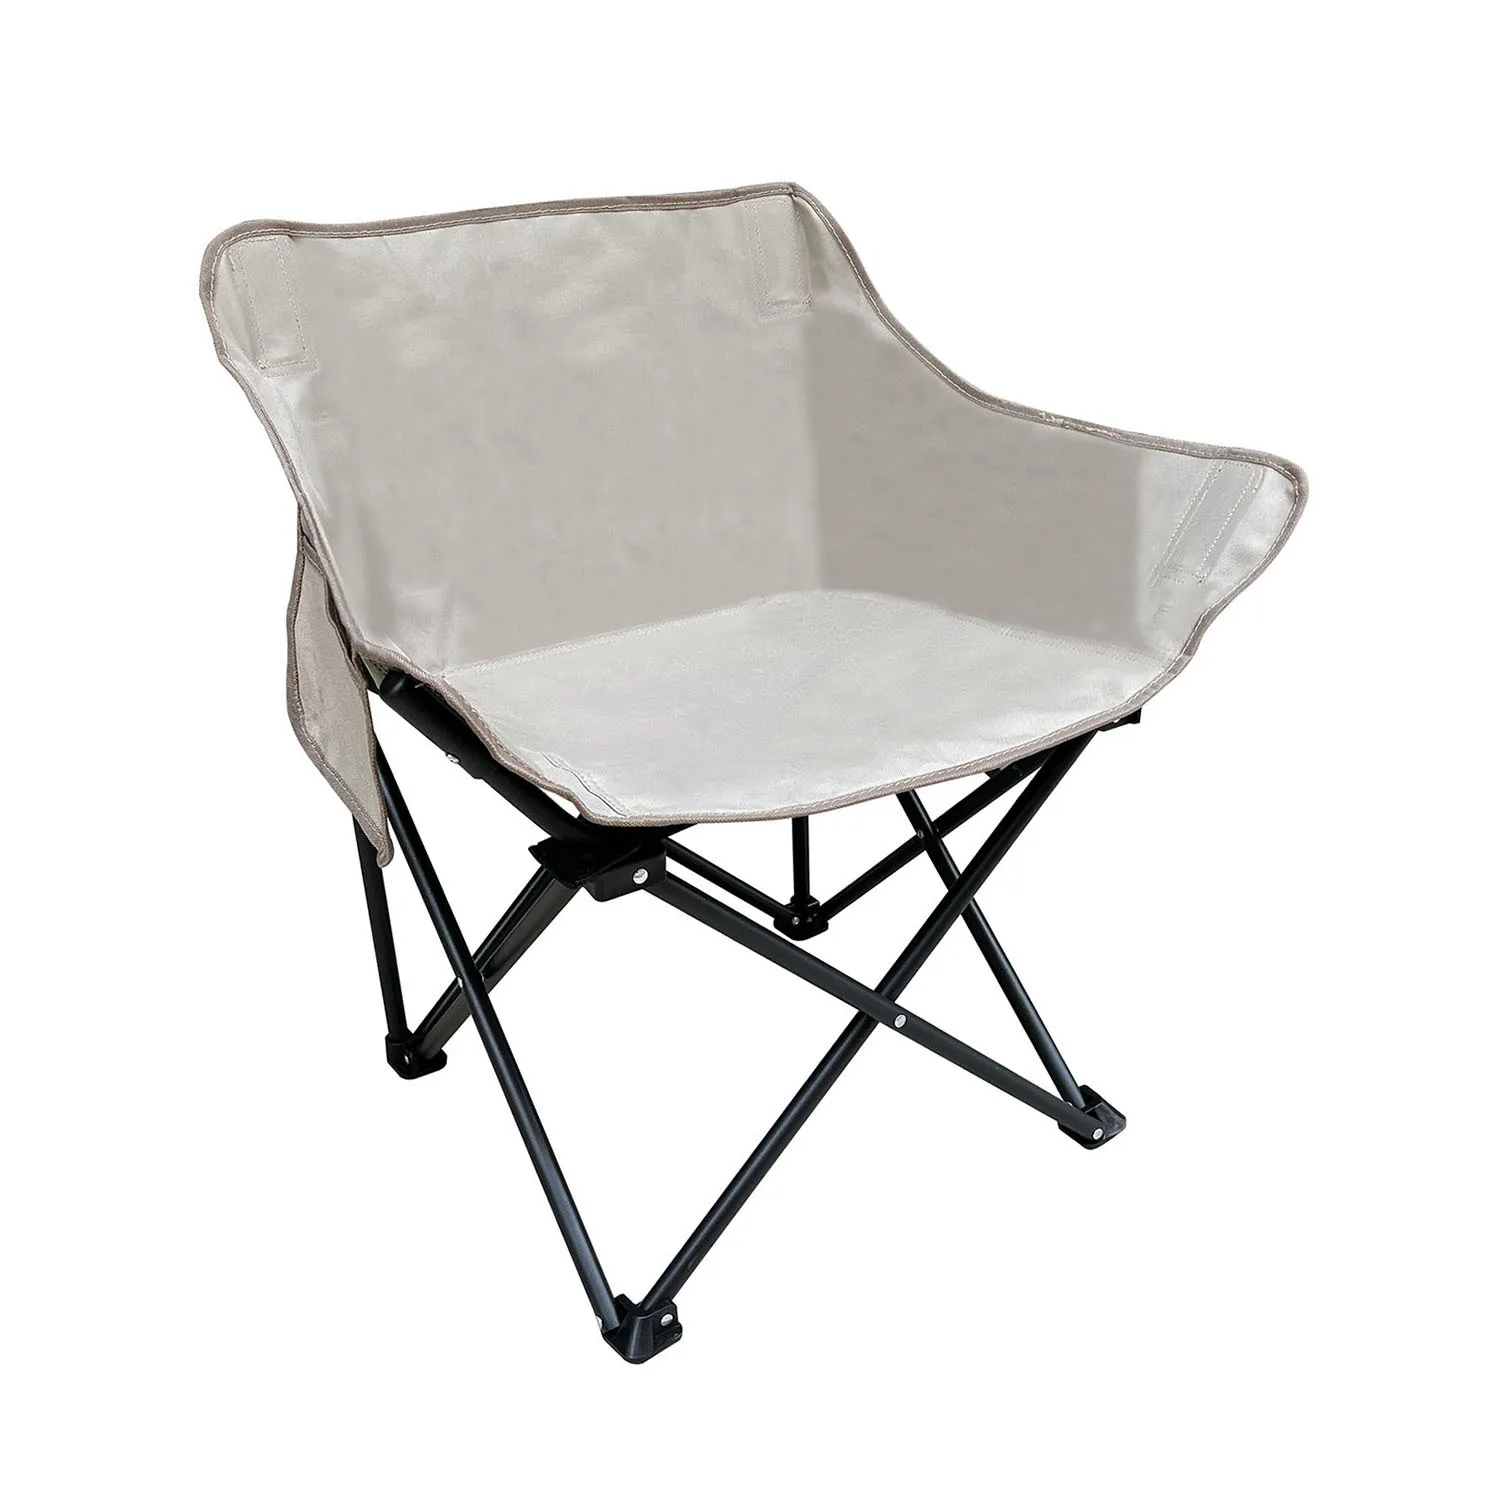 Convenient to carry foldable moon chairs for outdoor camping portable fishing - £110.15 GBP